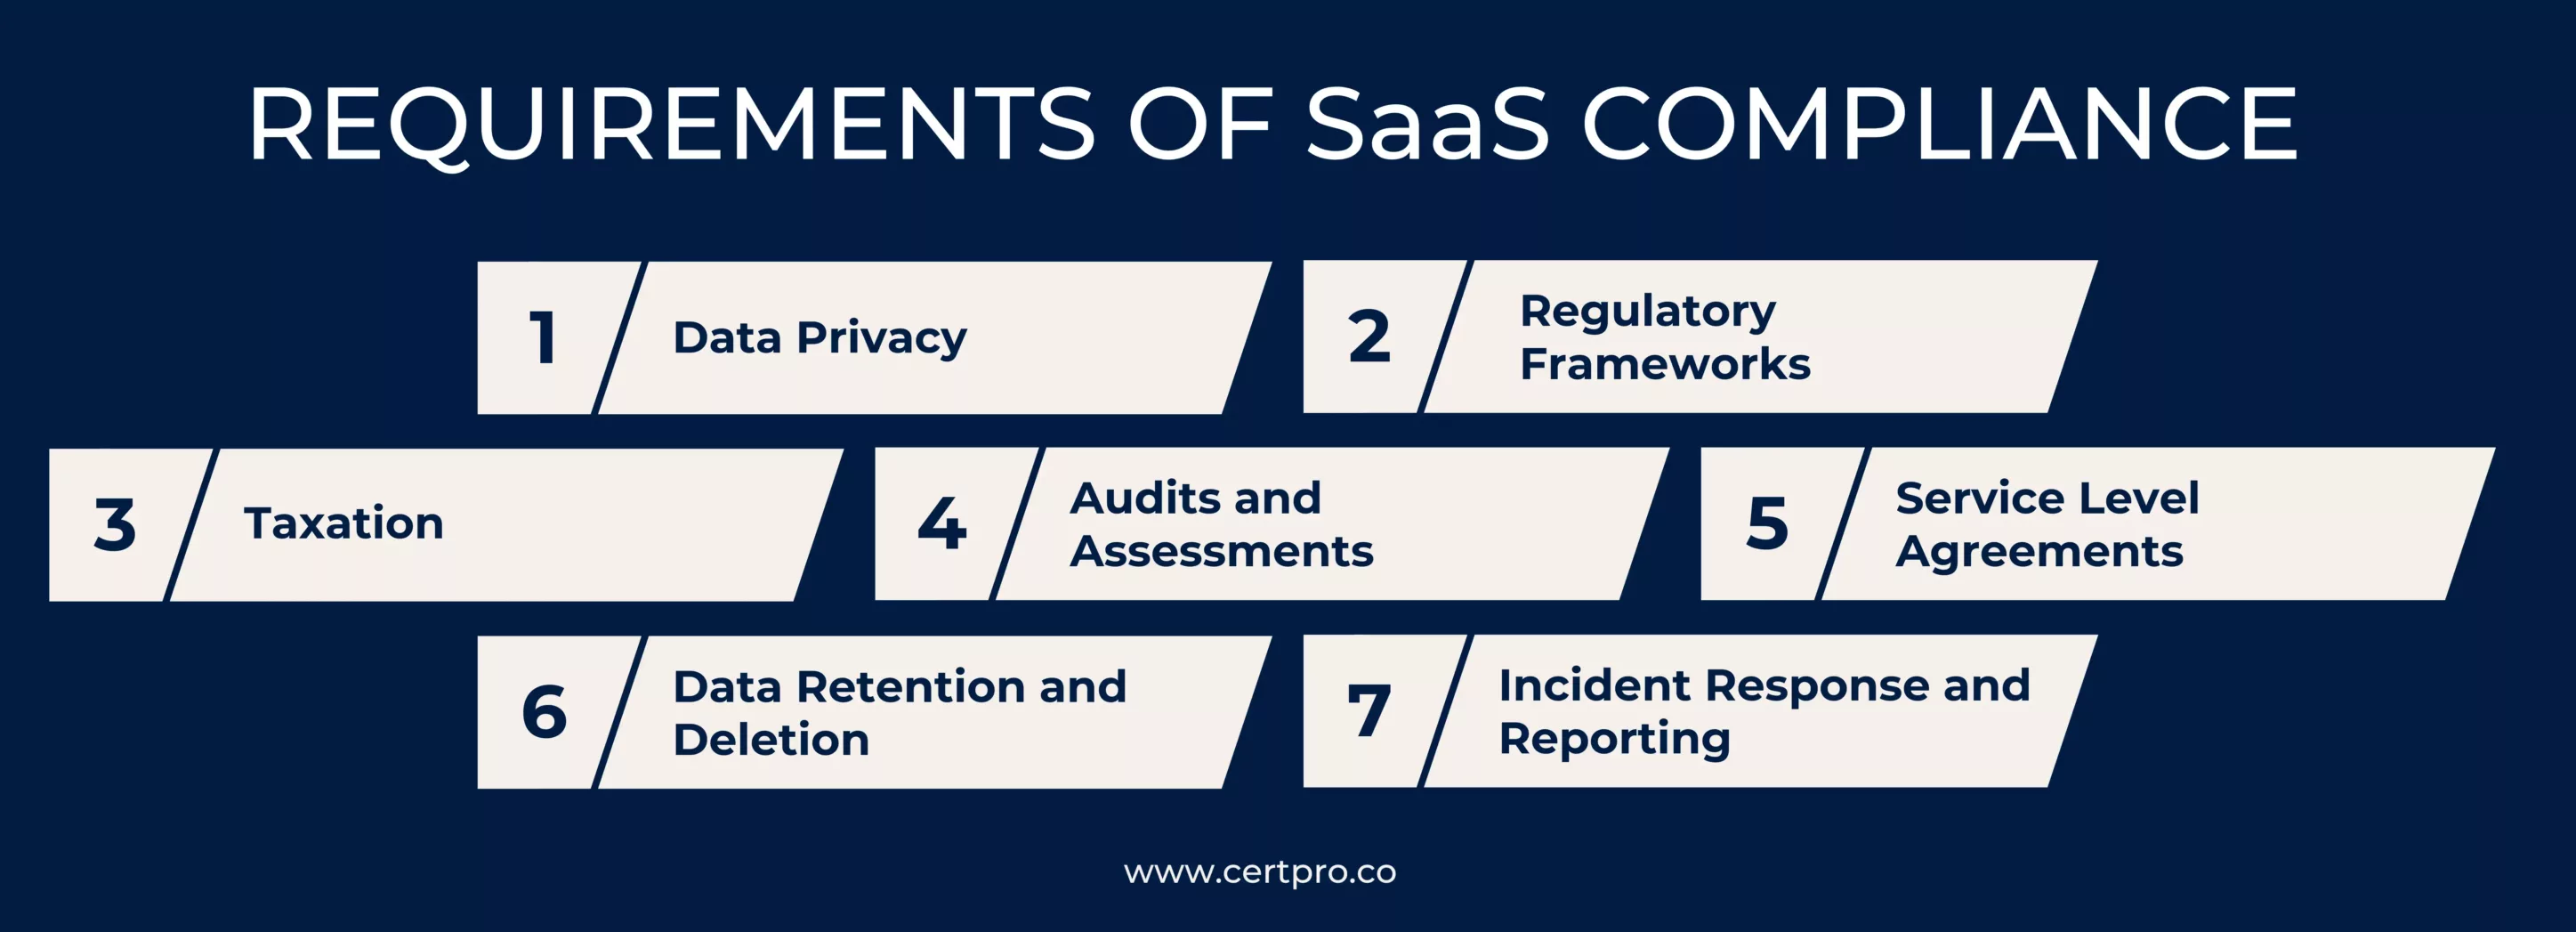 Requirements for SaaS